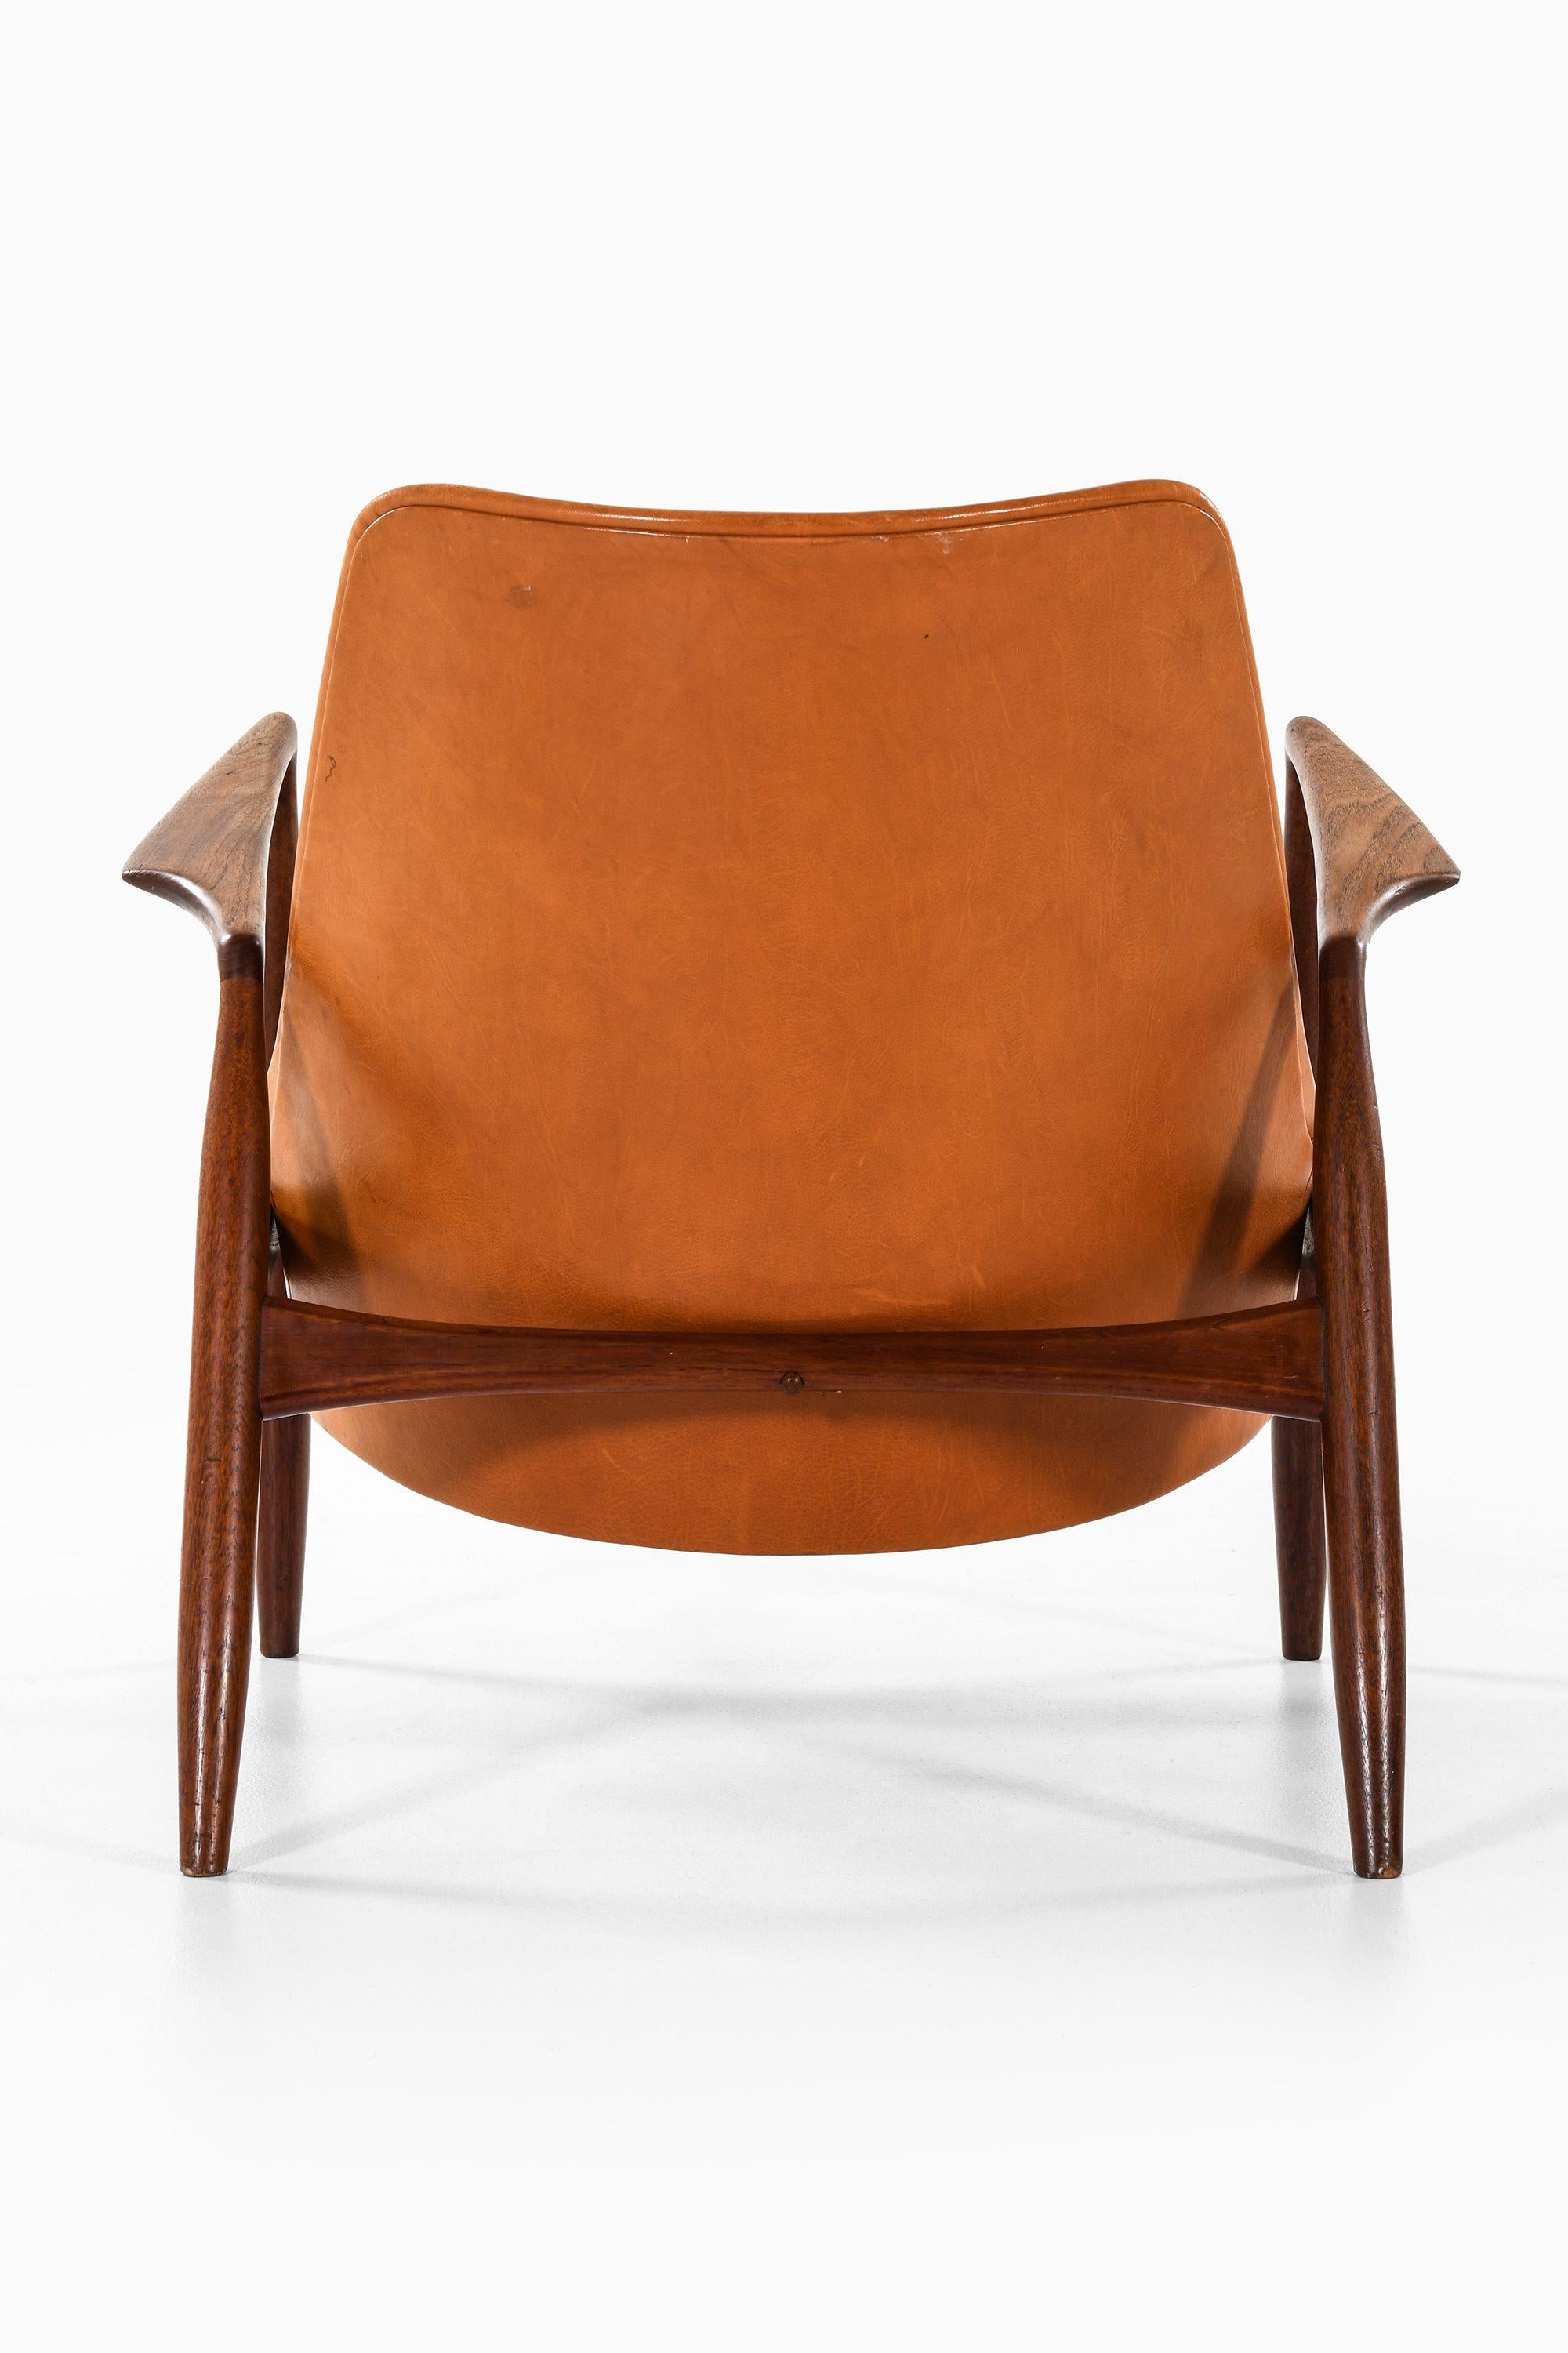 20th Century Pair of Easy Chairs in Teak and Leather by Ib Kofod-Larsen, 1950s For Sale